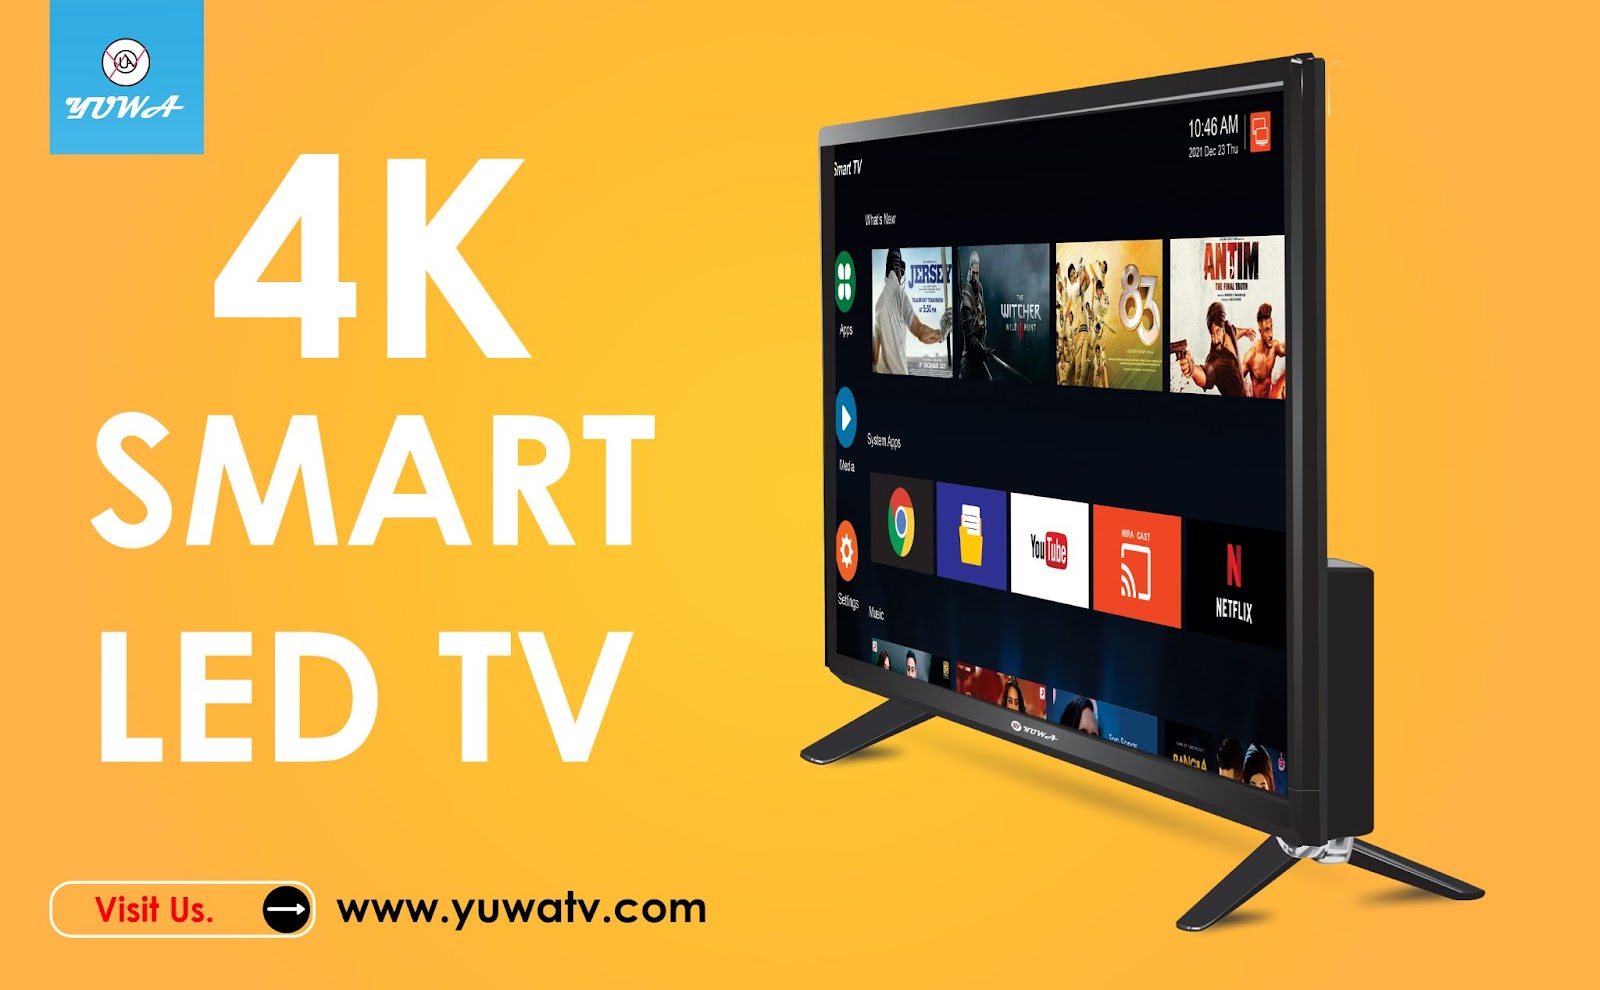 Smart LED TV Manufacturers in India
Smart LED TV Manufacturers in Delhi NCR
Android Television Manufacturers in noida
Best Smart LED TV in Noida
Best Smart TV in Noida
Best Smart LED TV in India
LED TV Manufacturers
LED TV Companies in India